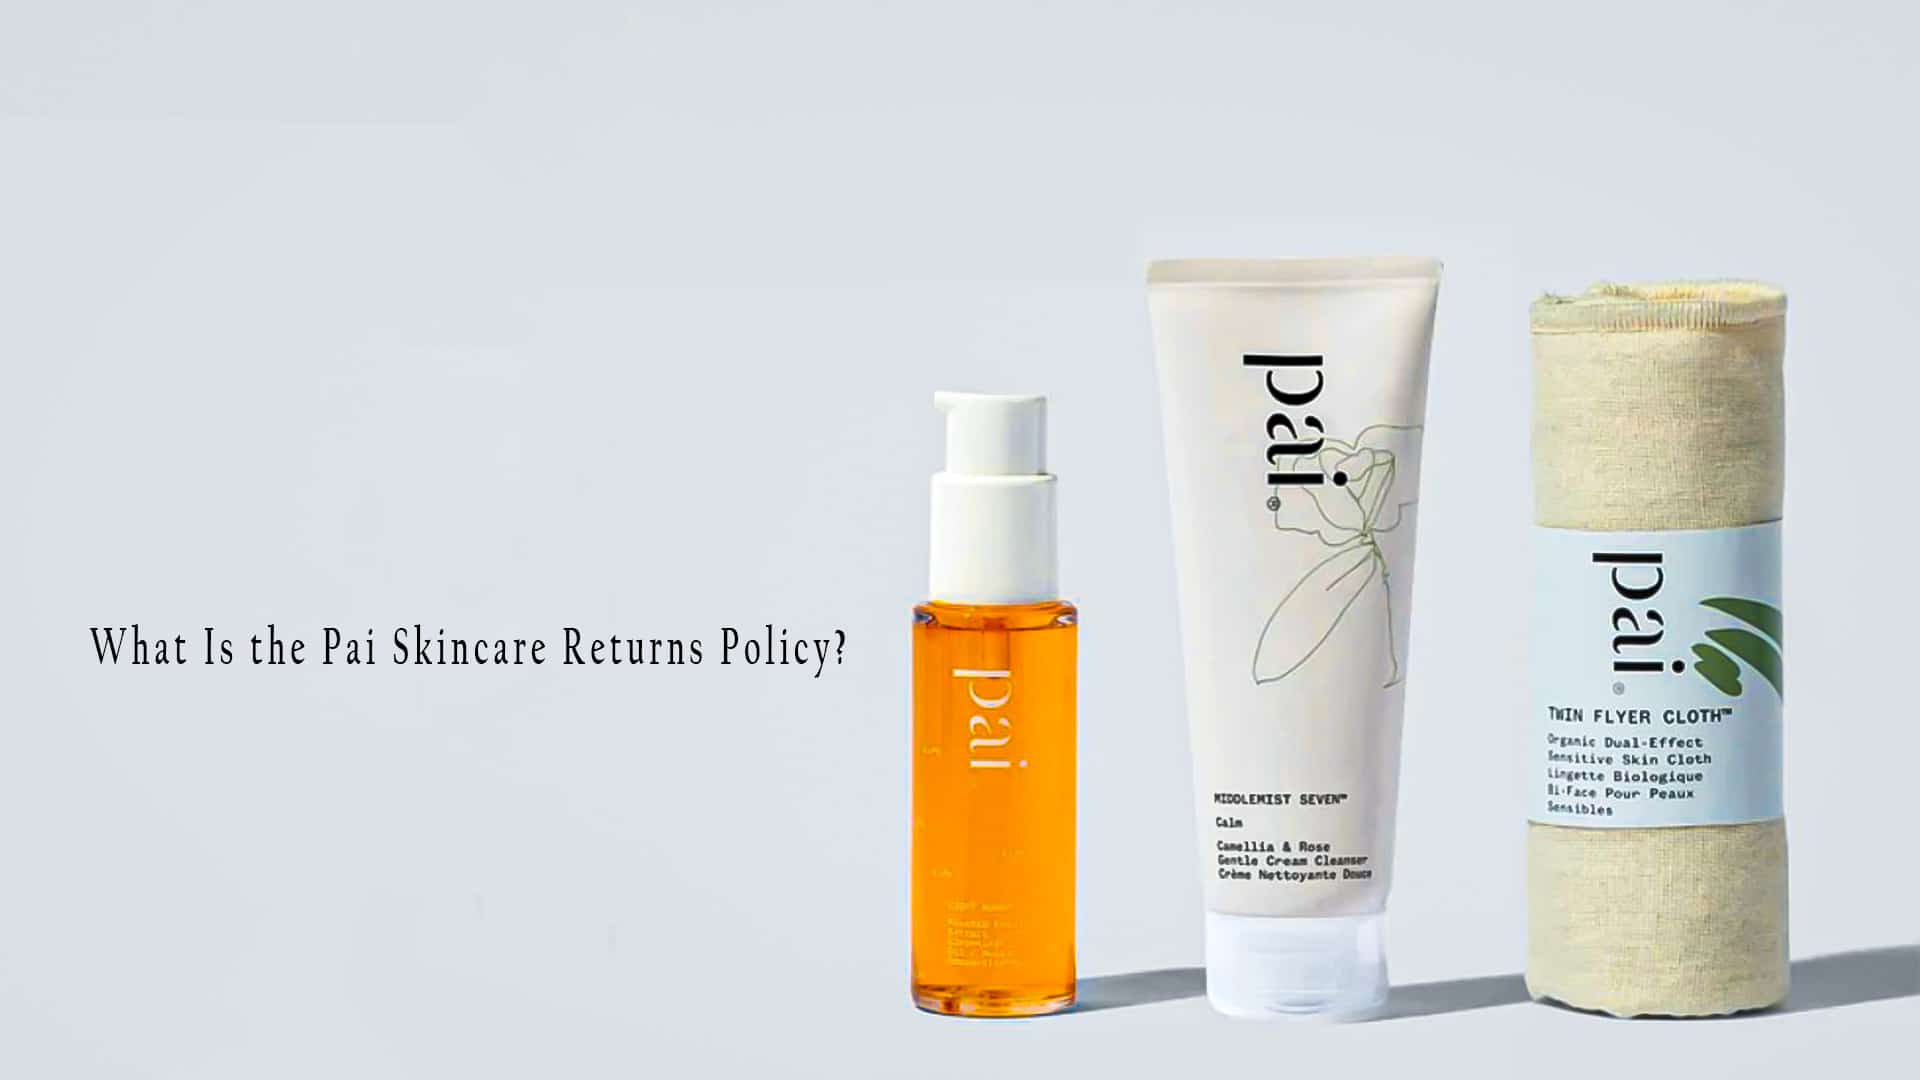 What is the Pai Skincare Returns Policy